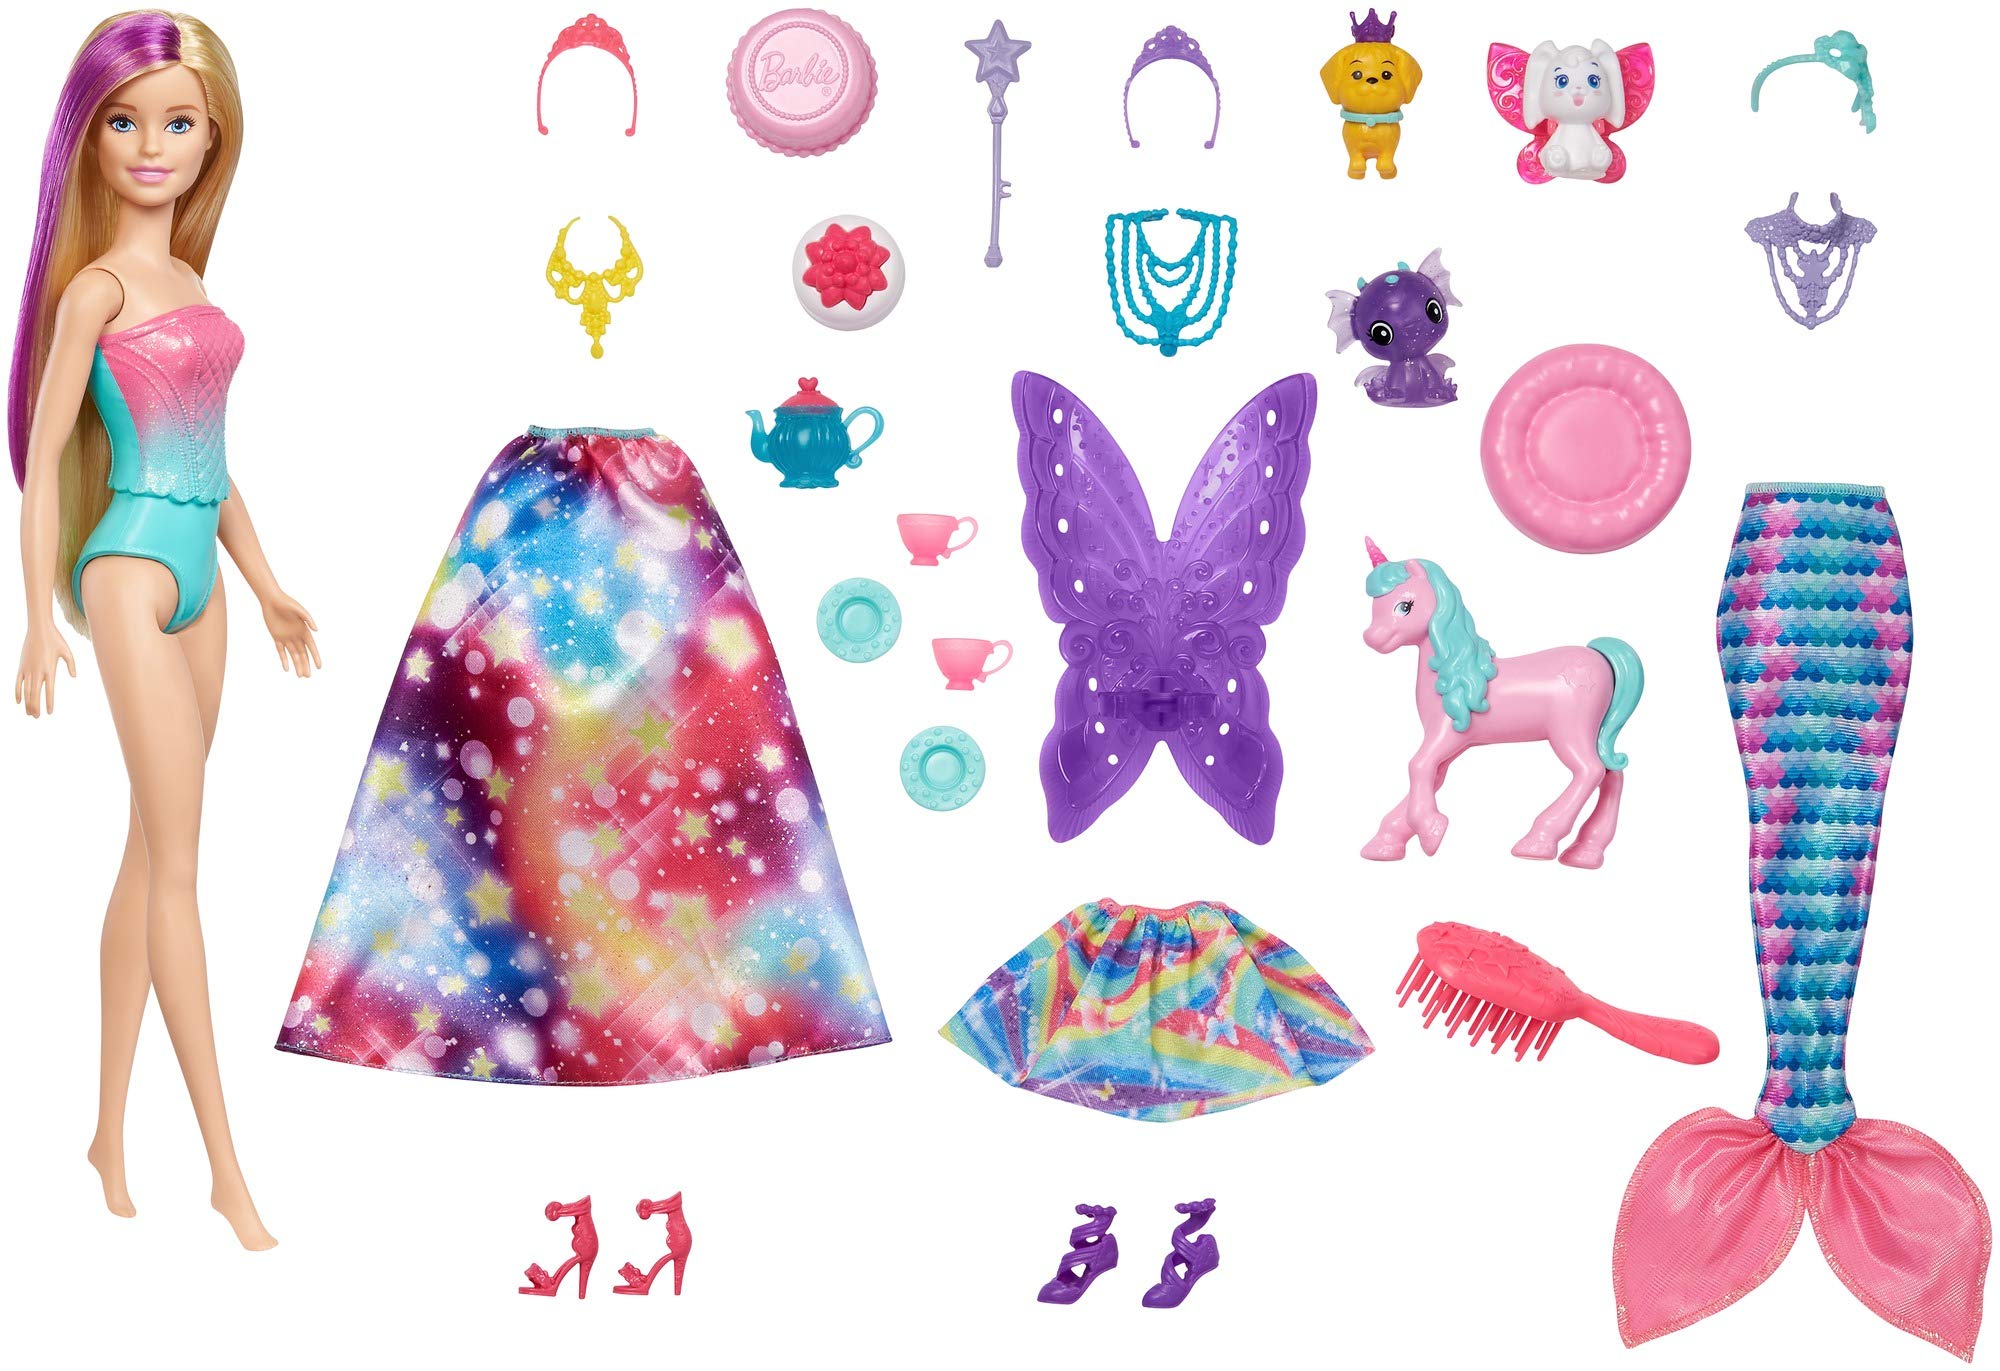 Barbie Dreamtopia Advent Calendar: Blonde Doll, 3 Fairytale Doll Fashions, 10 Accessories and 10 Storytelling Pieces Including 3 Pets, for 3 to 7 Years Old